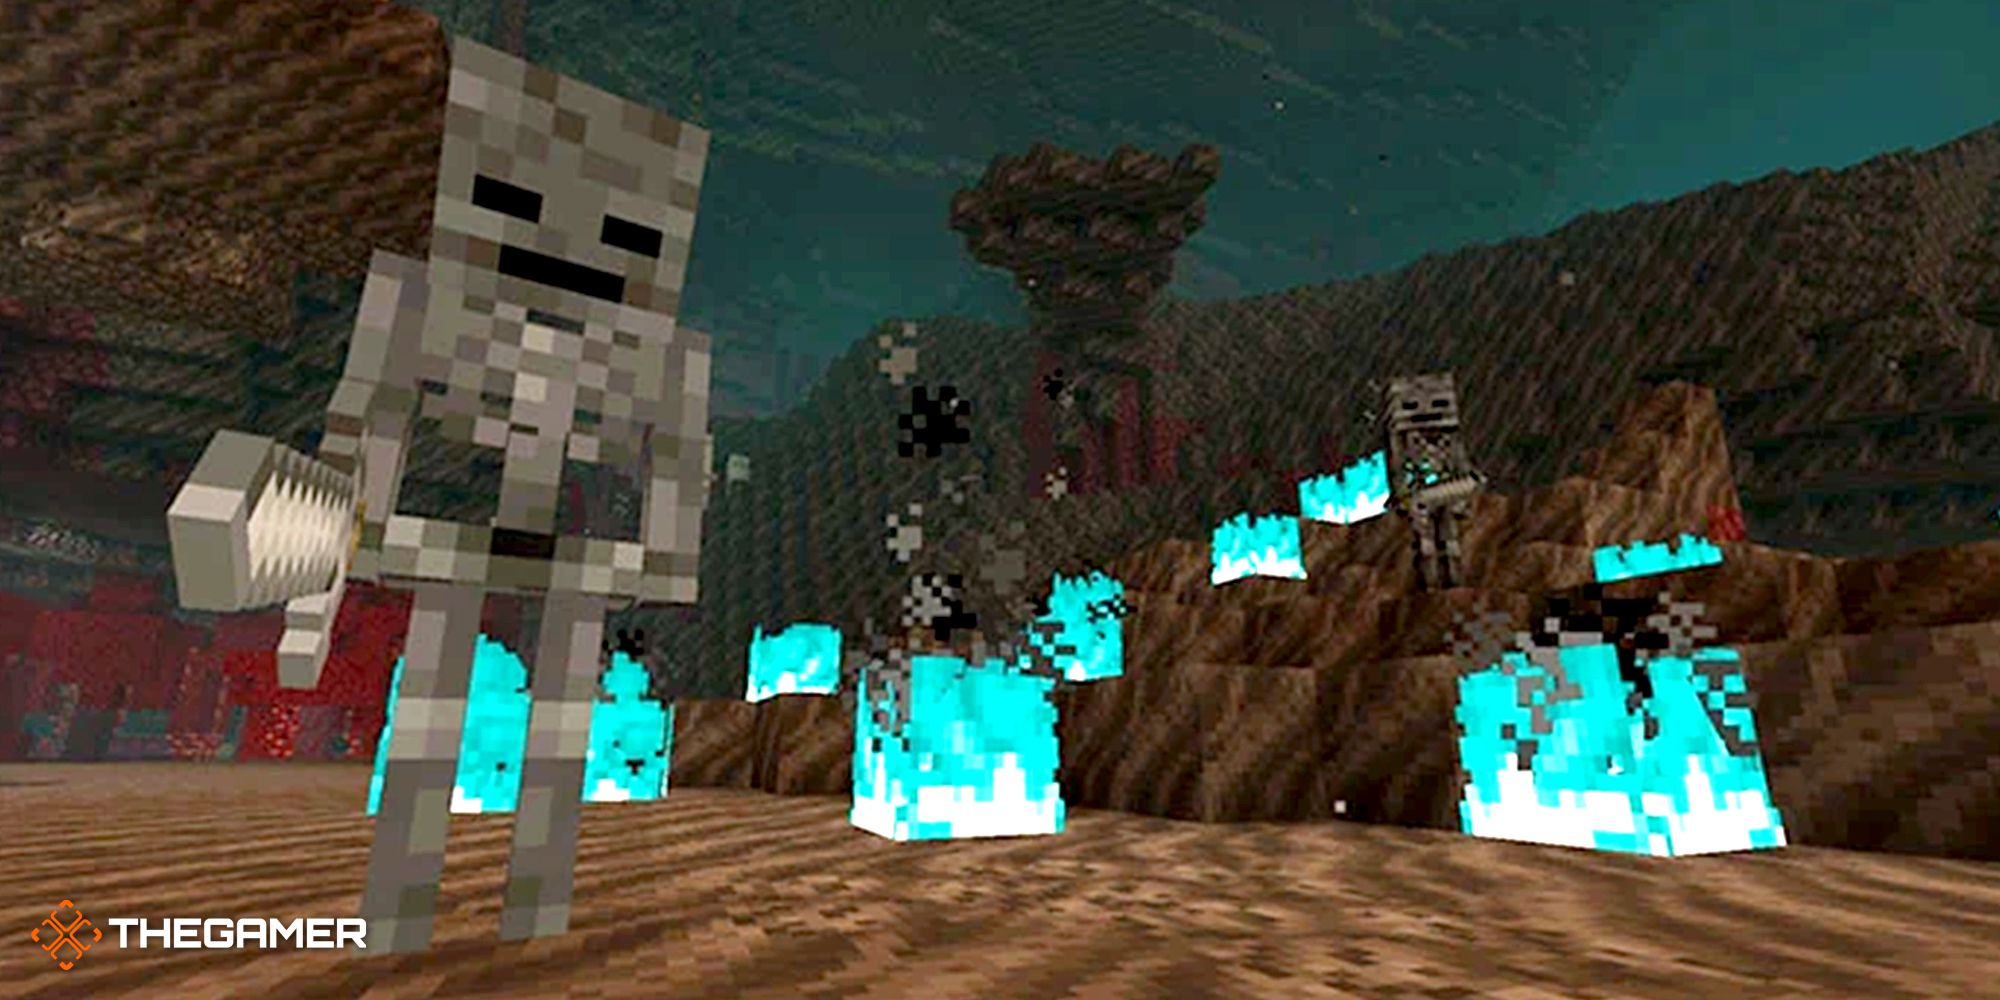 Game screen from Minecraft.